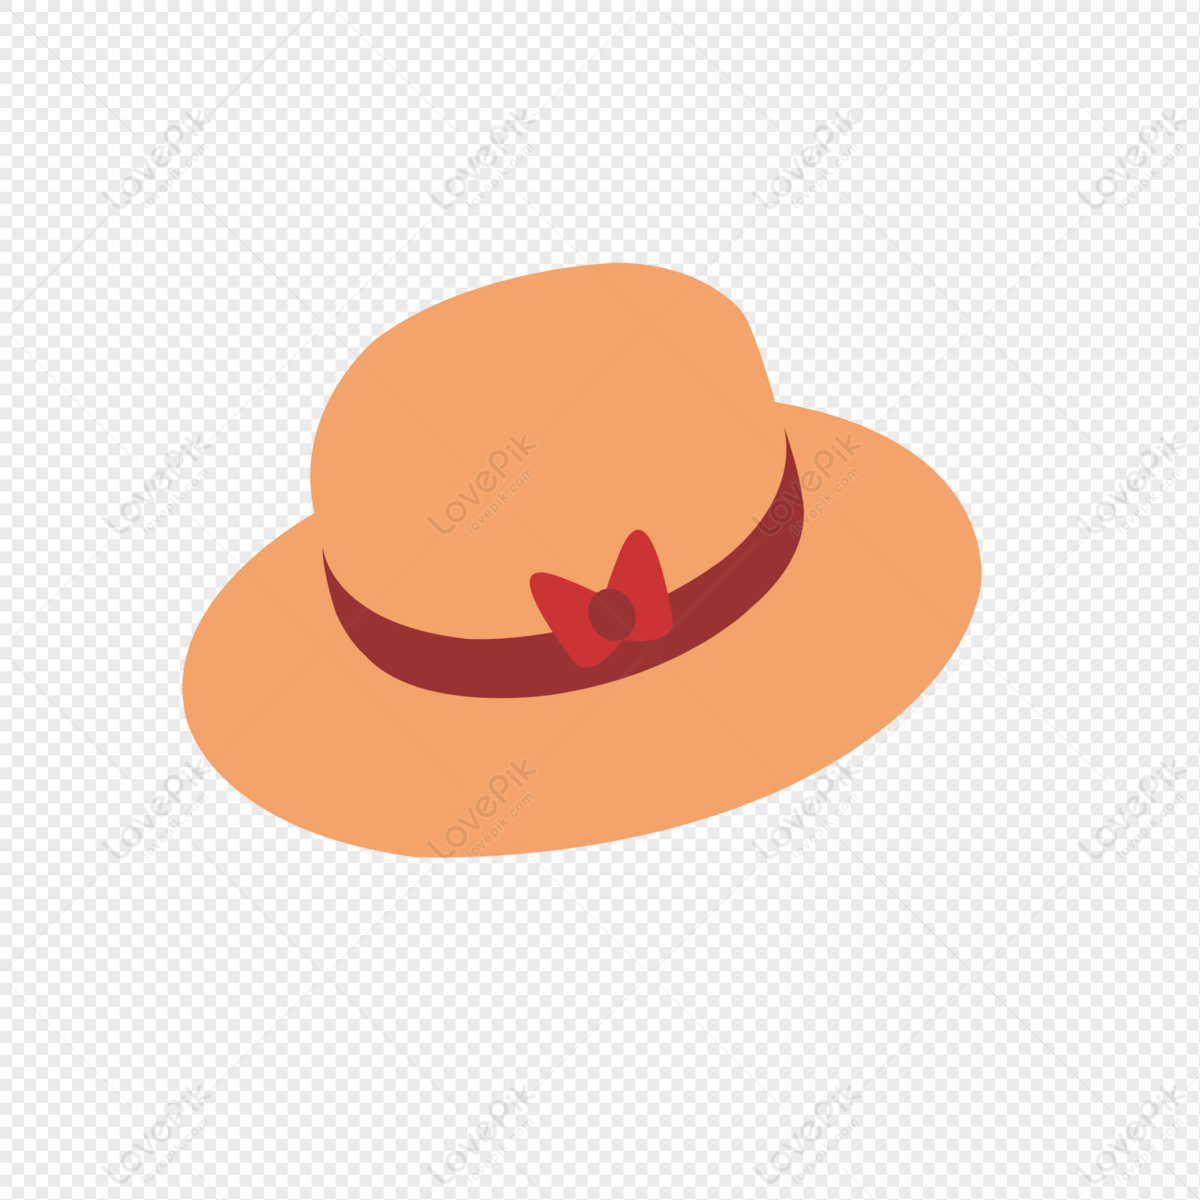 Hat PNG Image Free Download And Clipart Image For Free Download ...